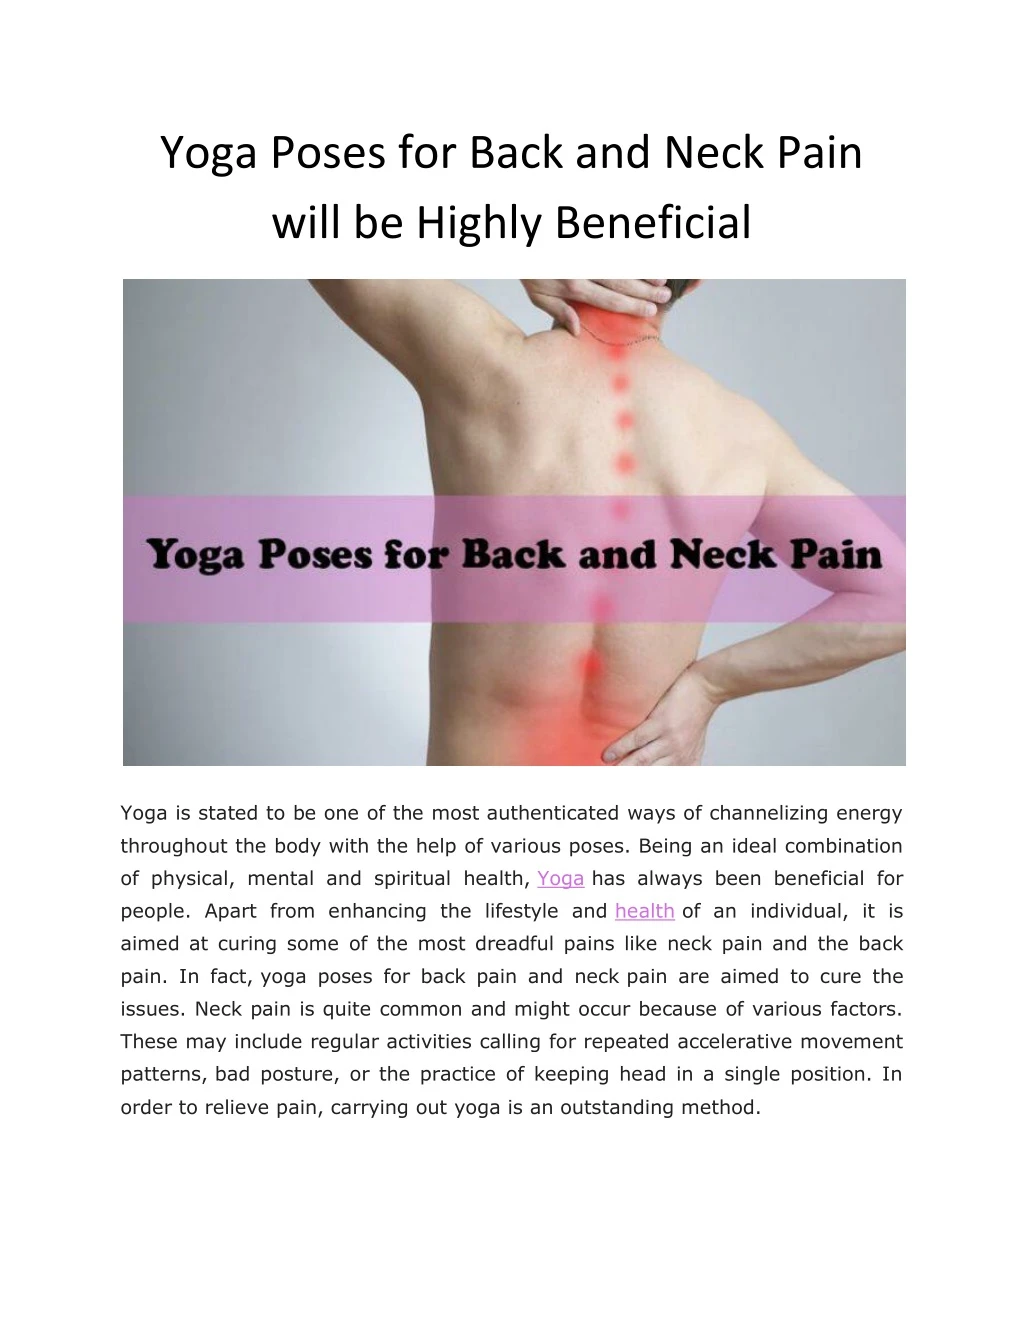 yoga poses for back and neck pain will be highly